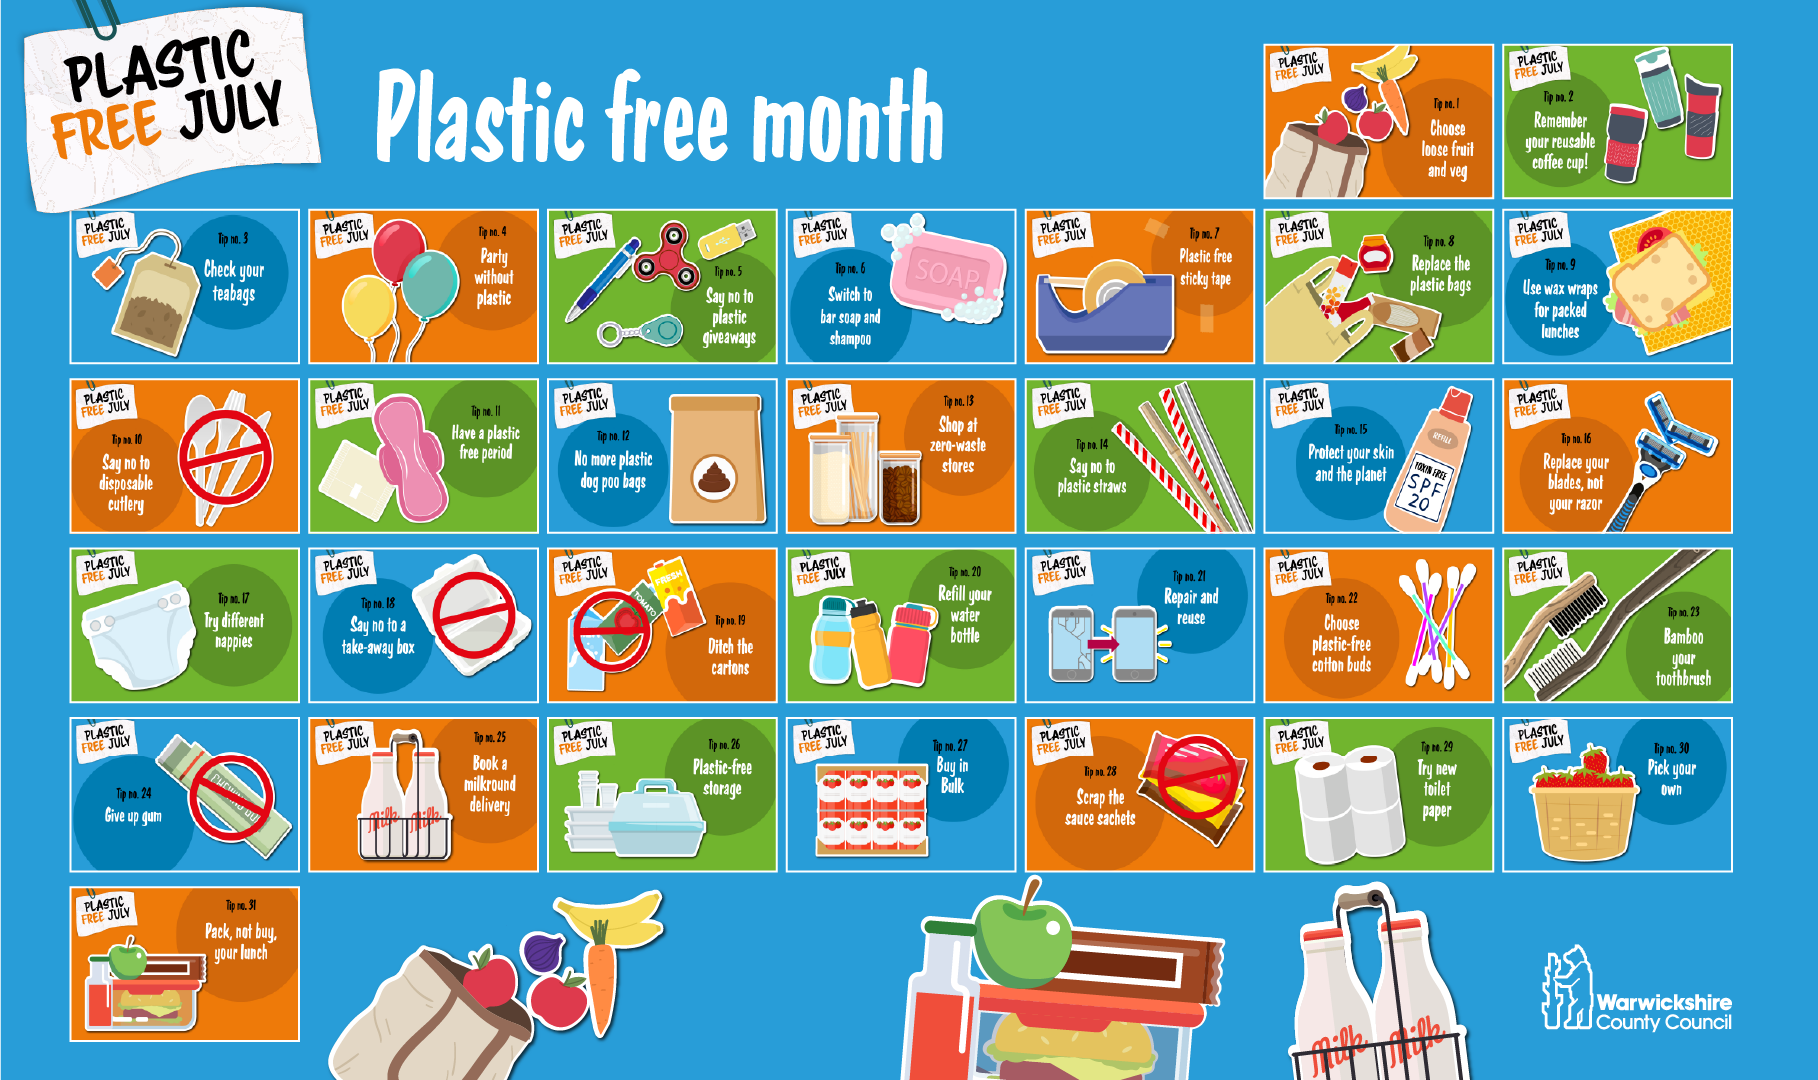 A calendar showing 31 tips for being plastic-free